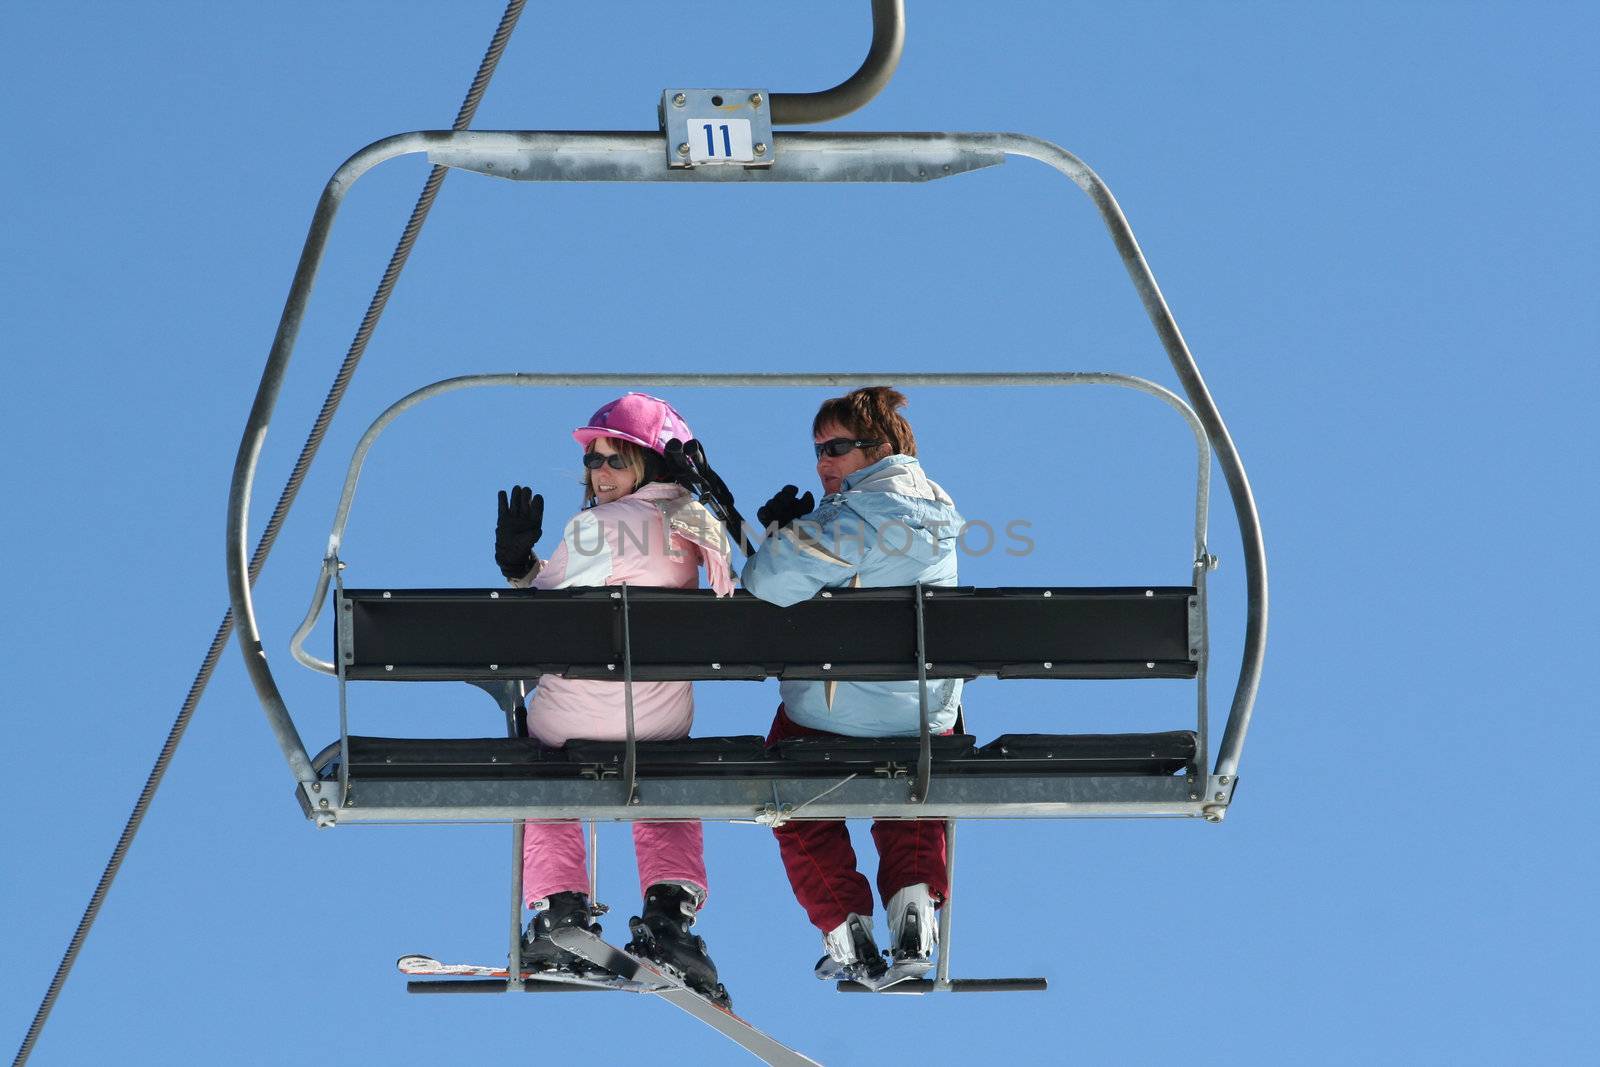 Two women wave from up on the Ski lift.